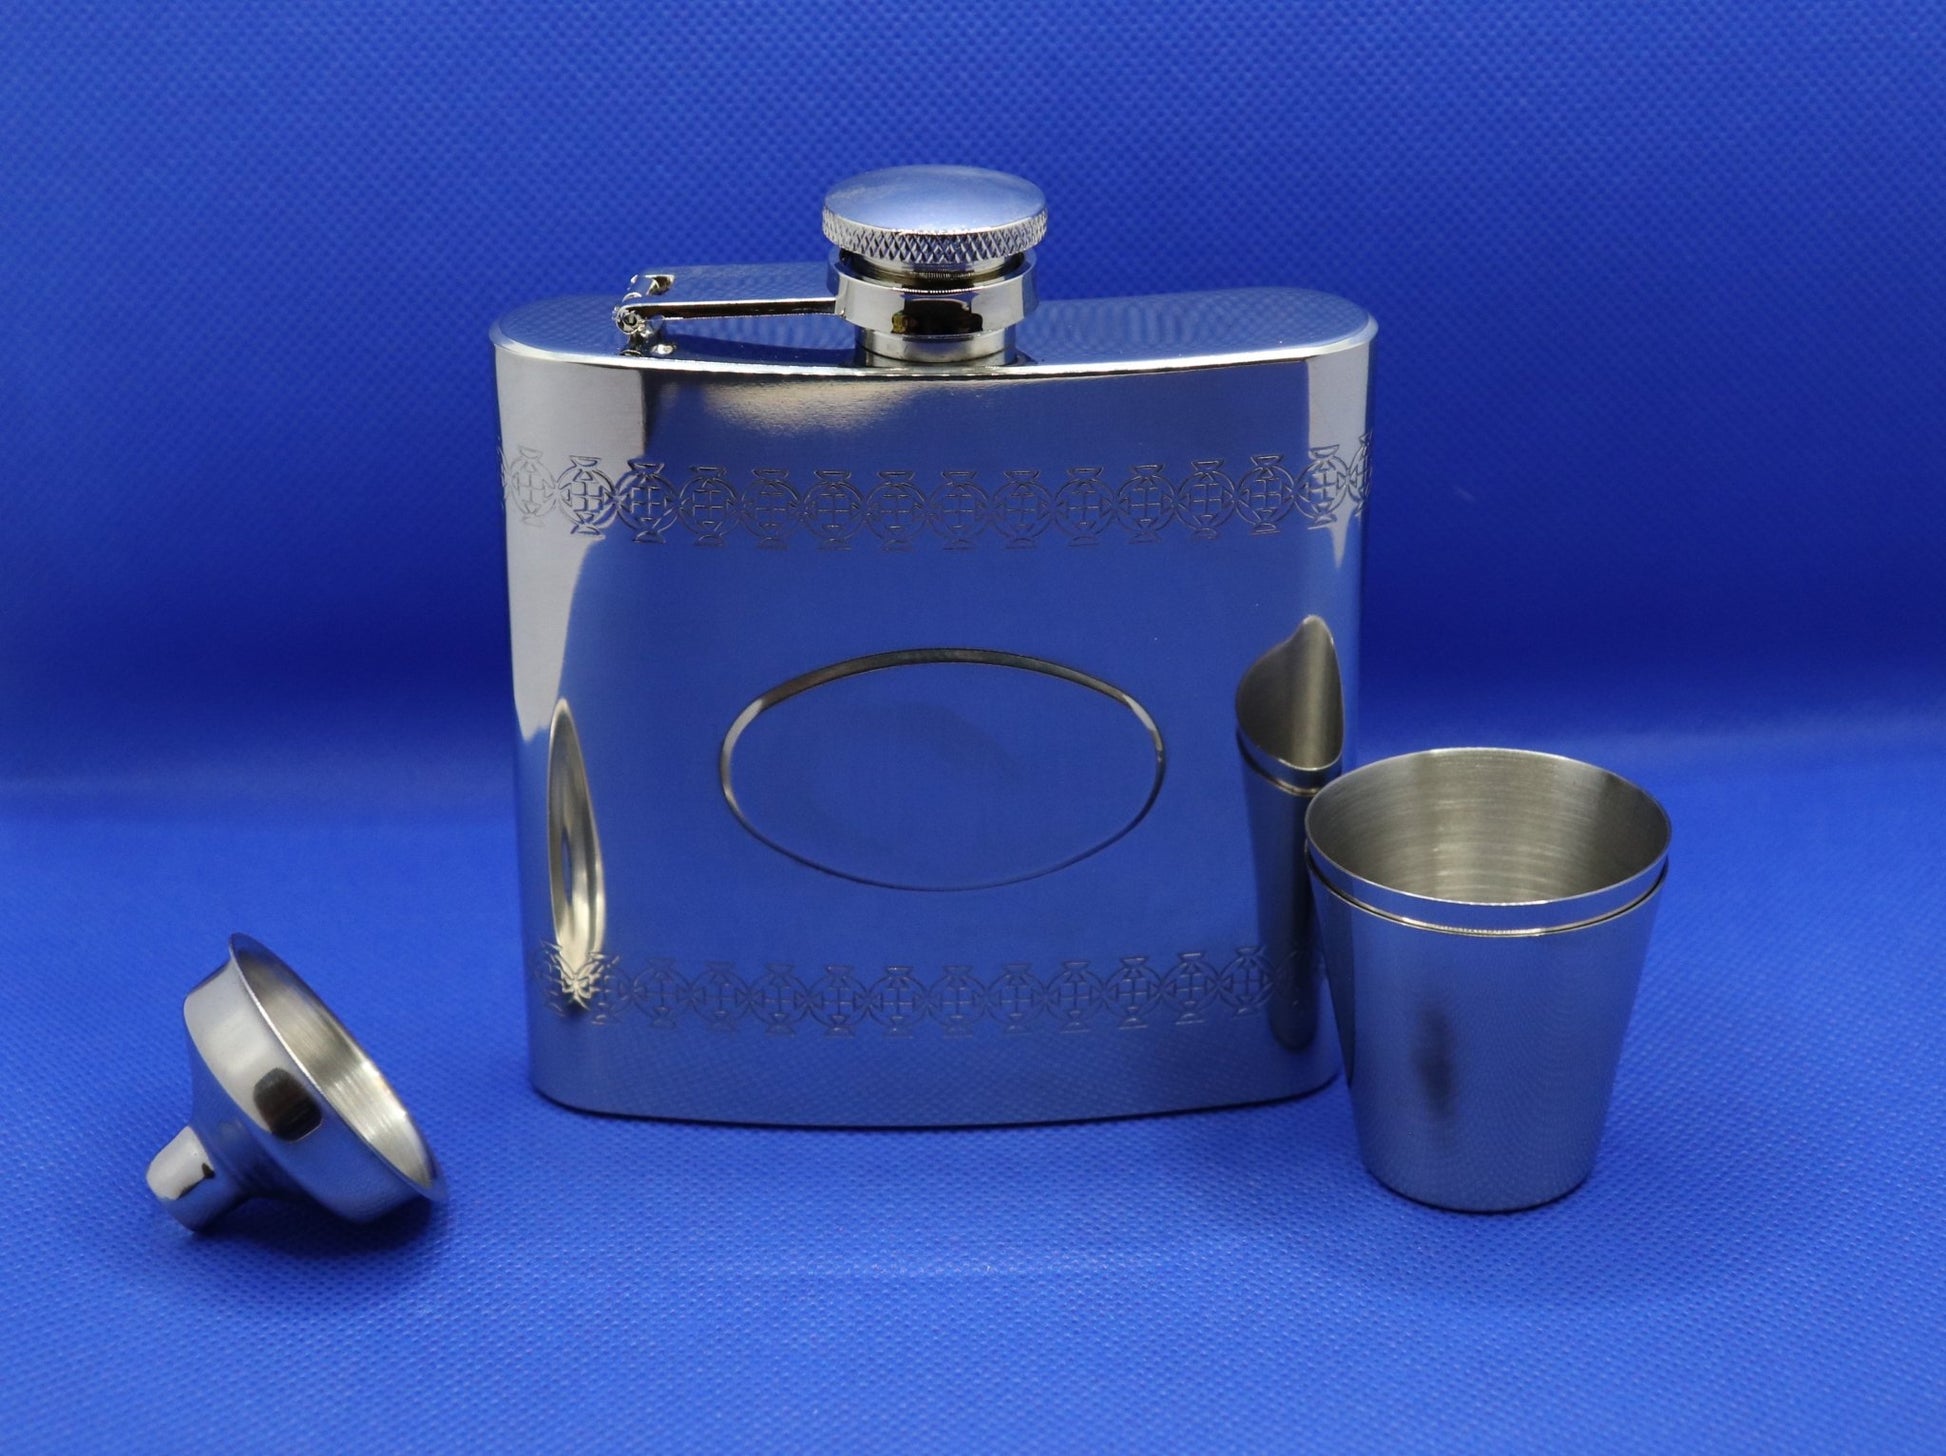 Hip Flask #2 - A & M News and Gifts